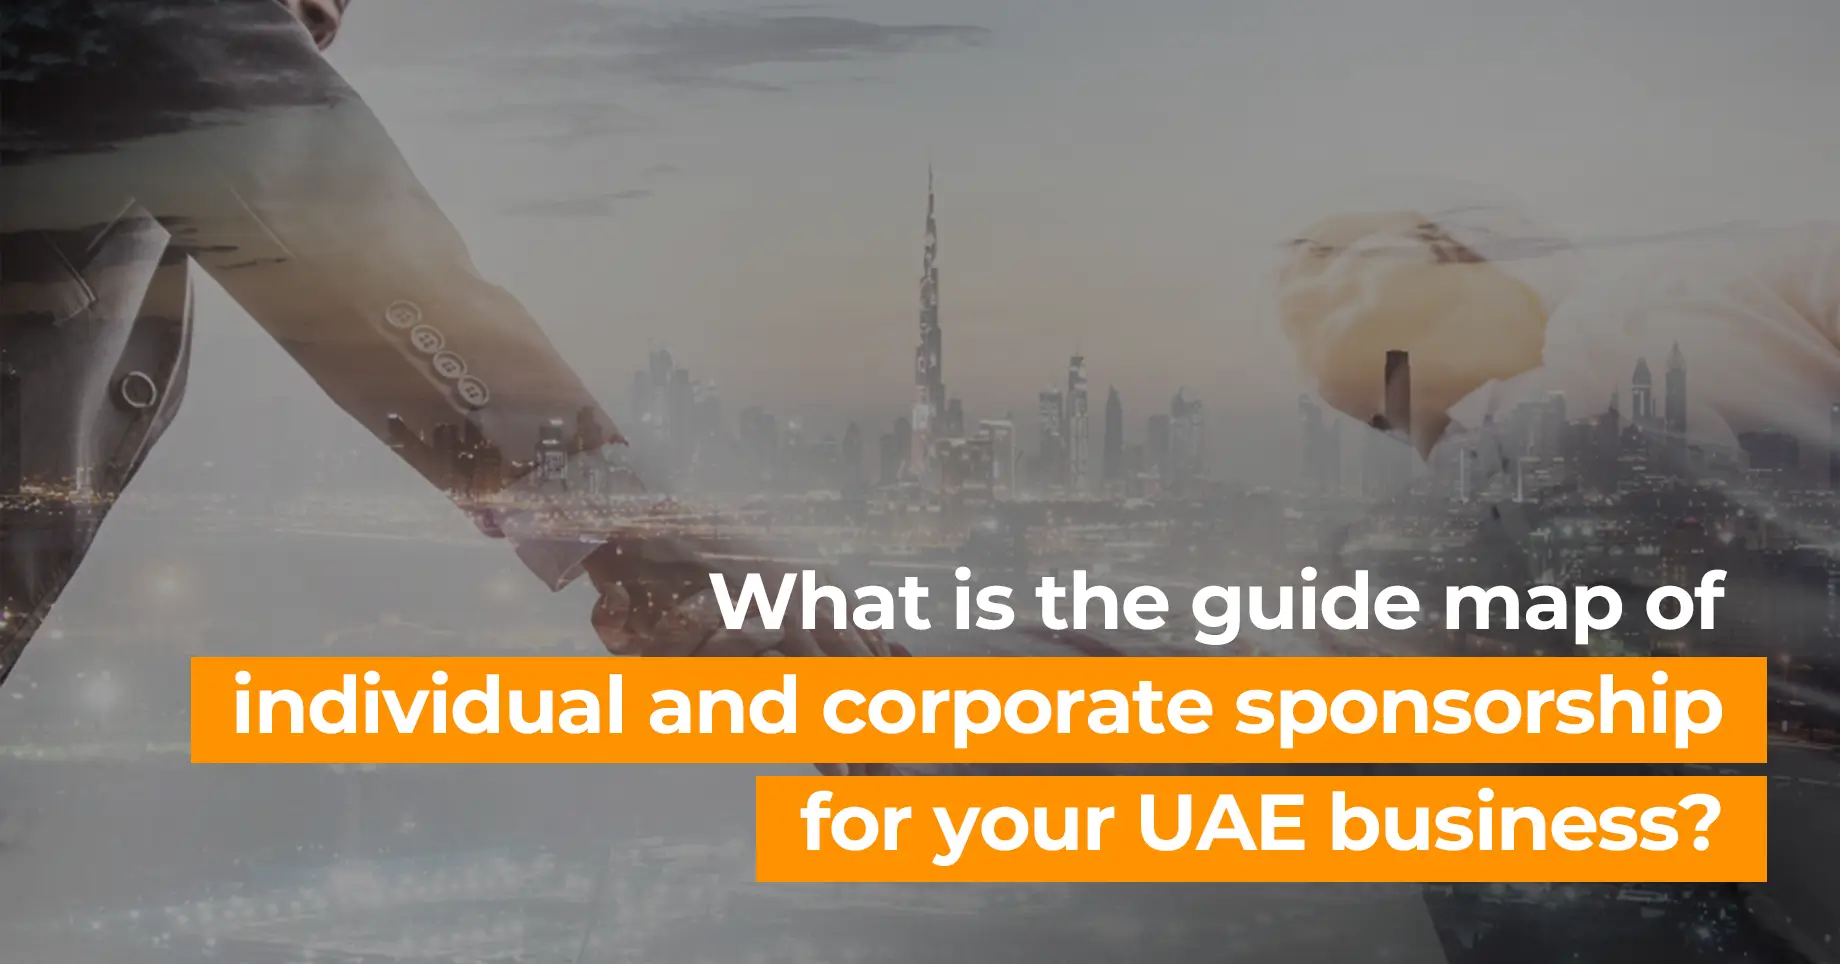 What is the guide map of individual and corporate sponsorship for your UAE business